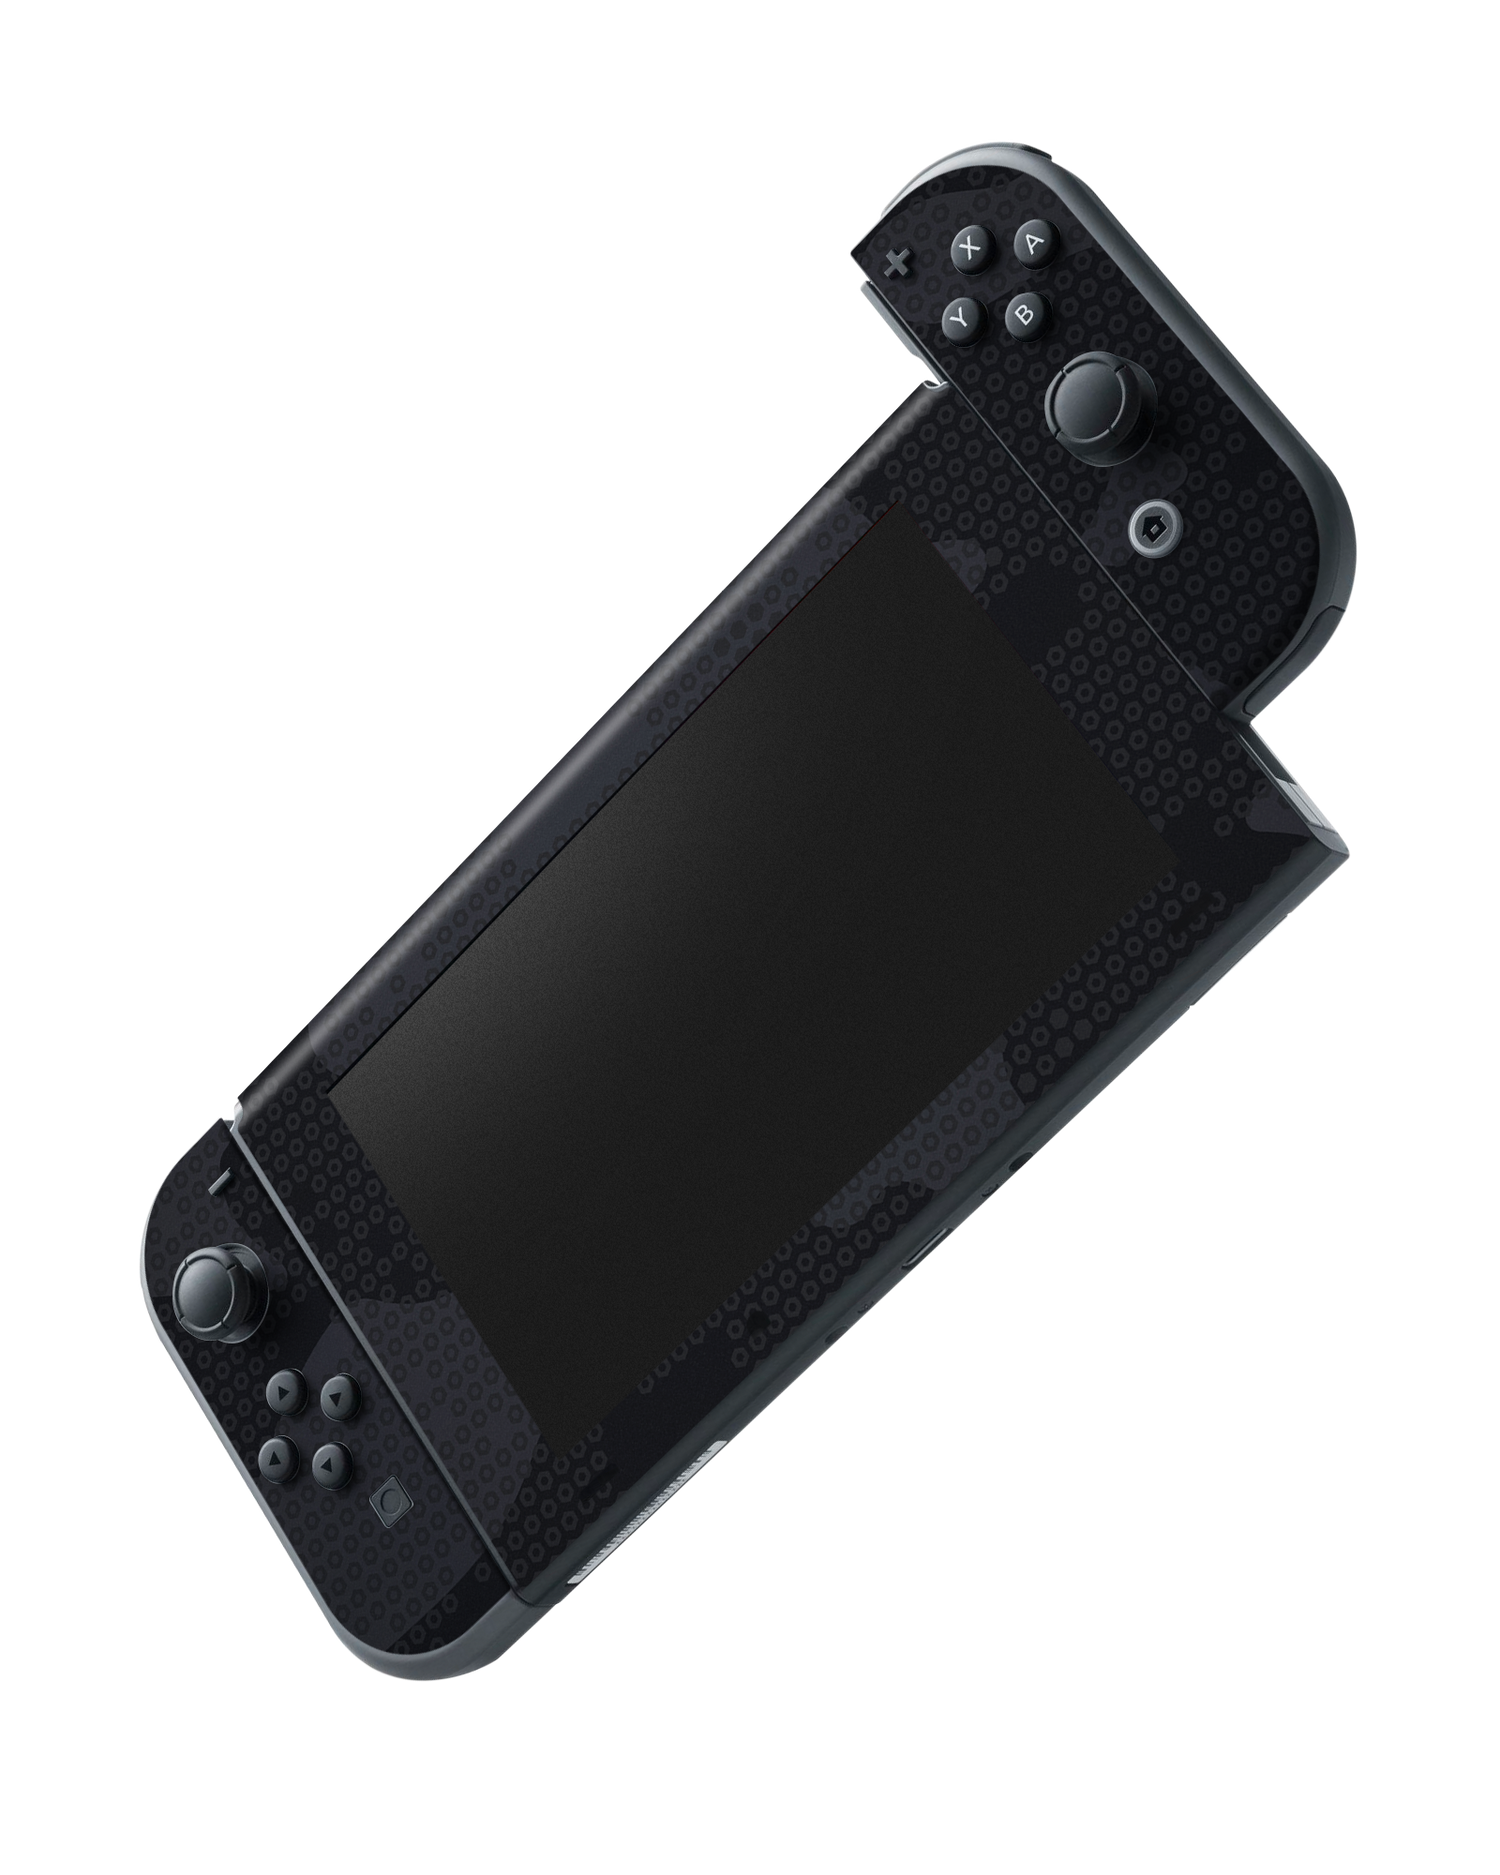 Spec Ops Dark Console Skin for Nintendo Switch: Joy-Con removing 